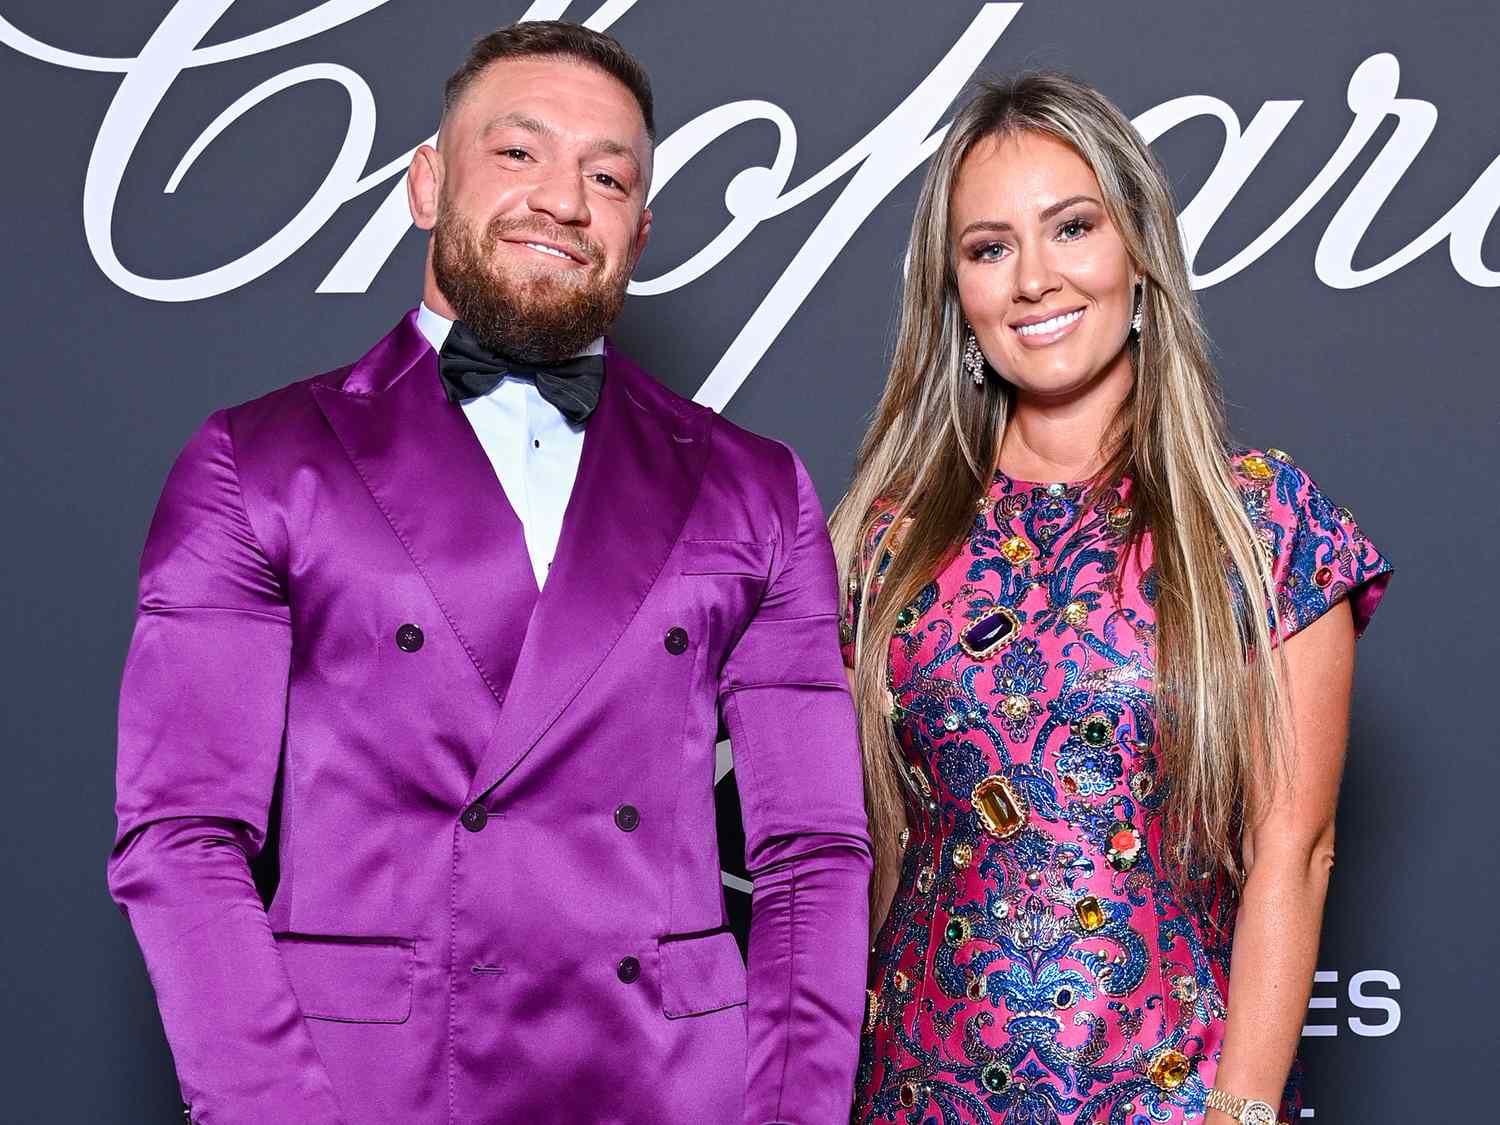 Conor McGregor And Dee Devlin Welcome Their Fourth Child, A Baby Boy